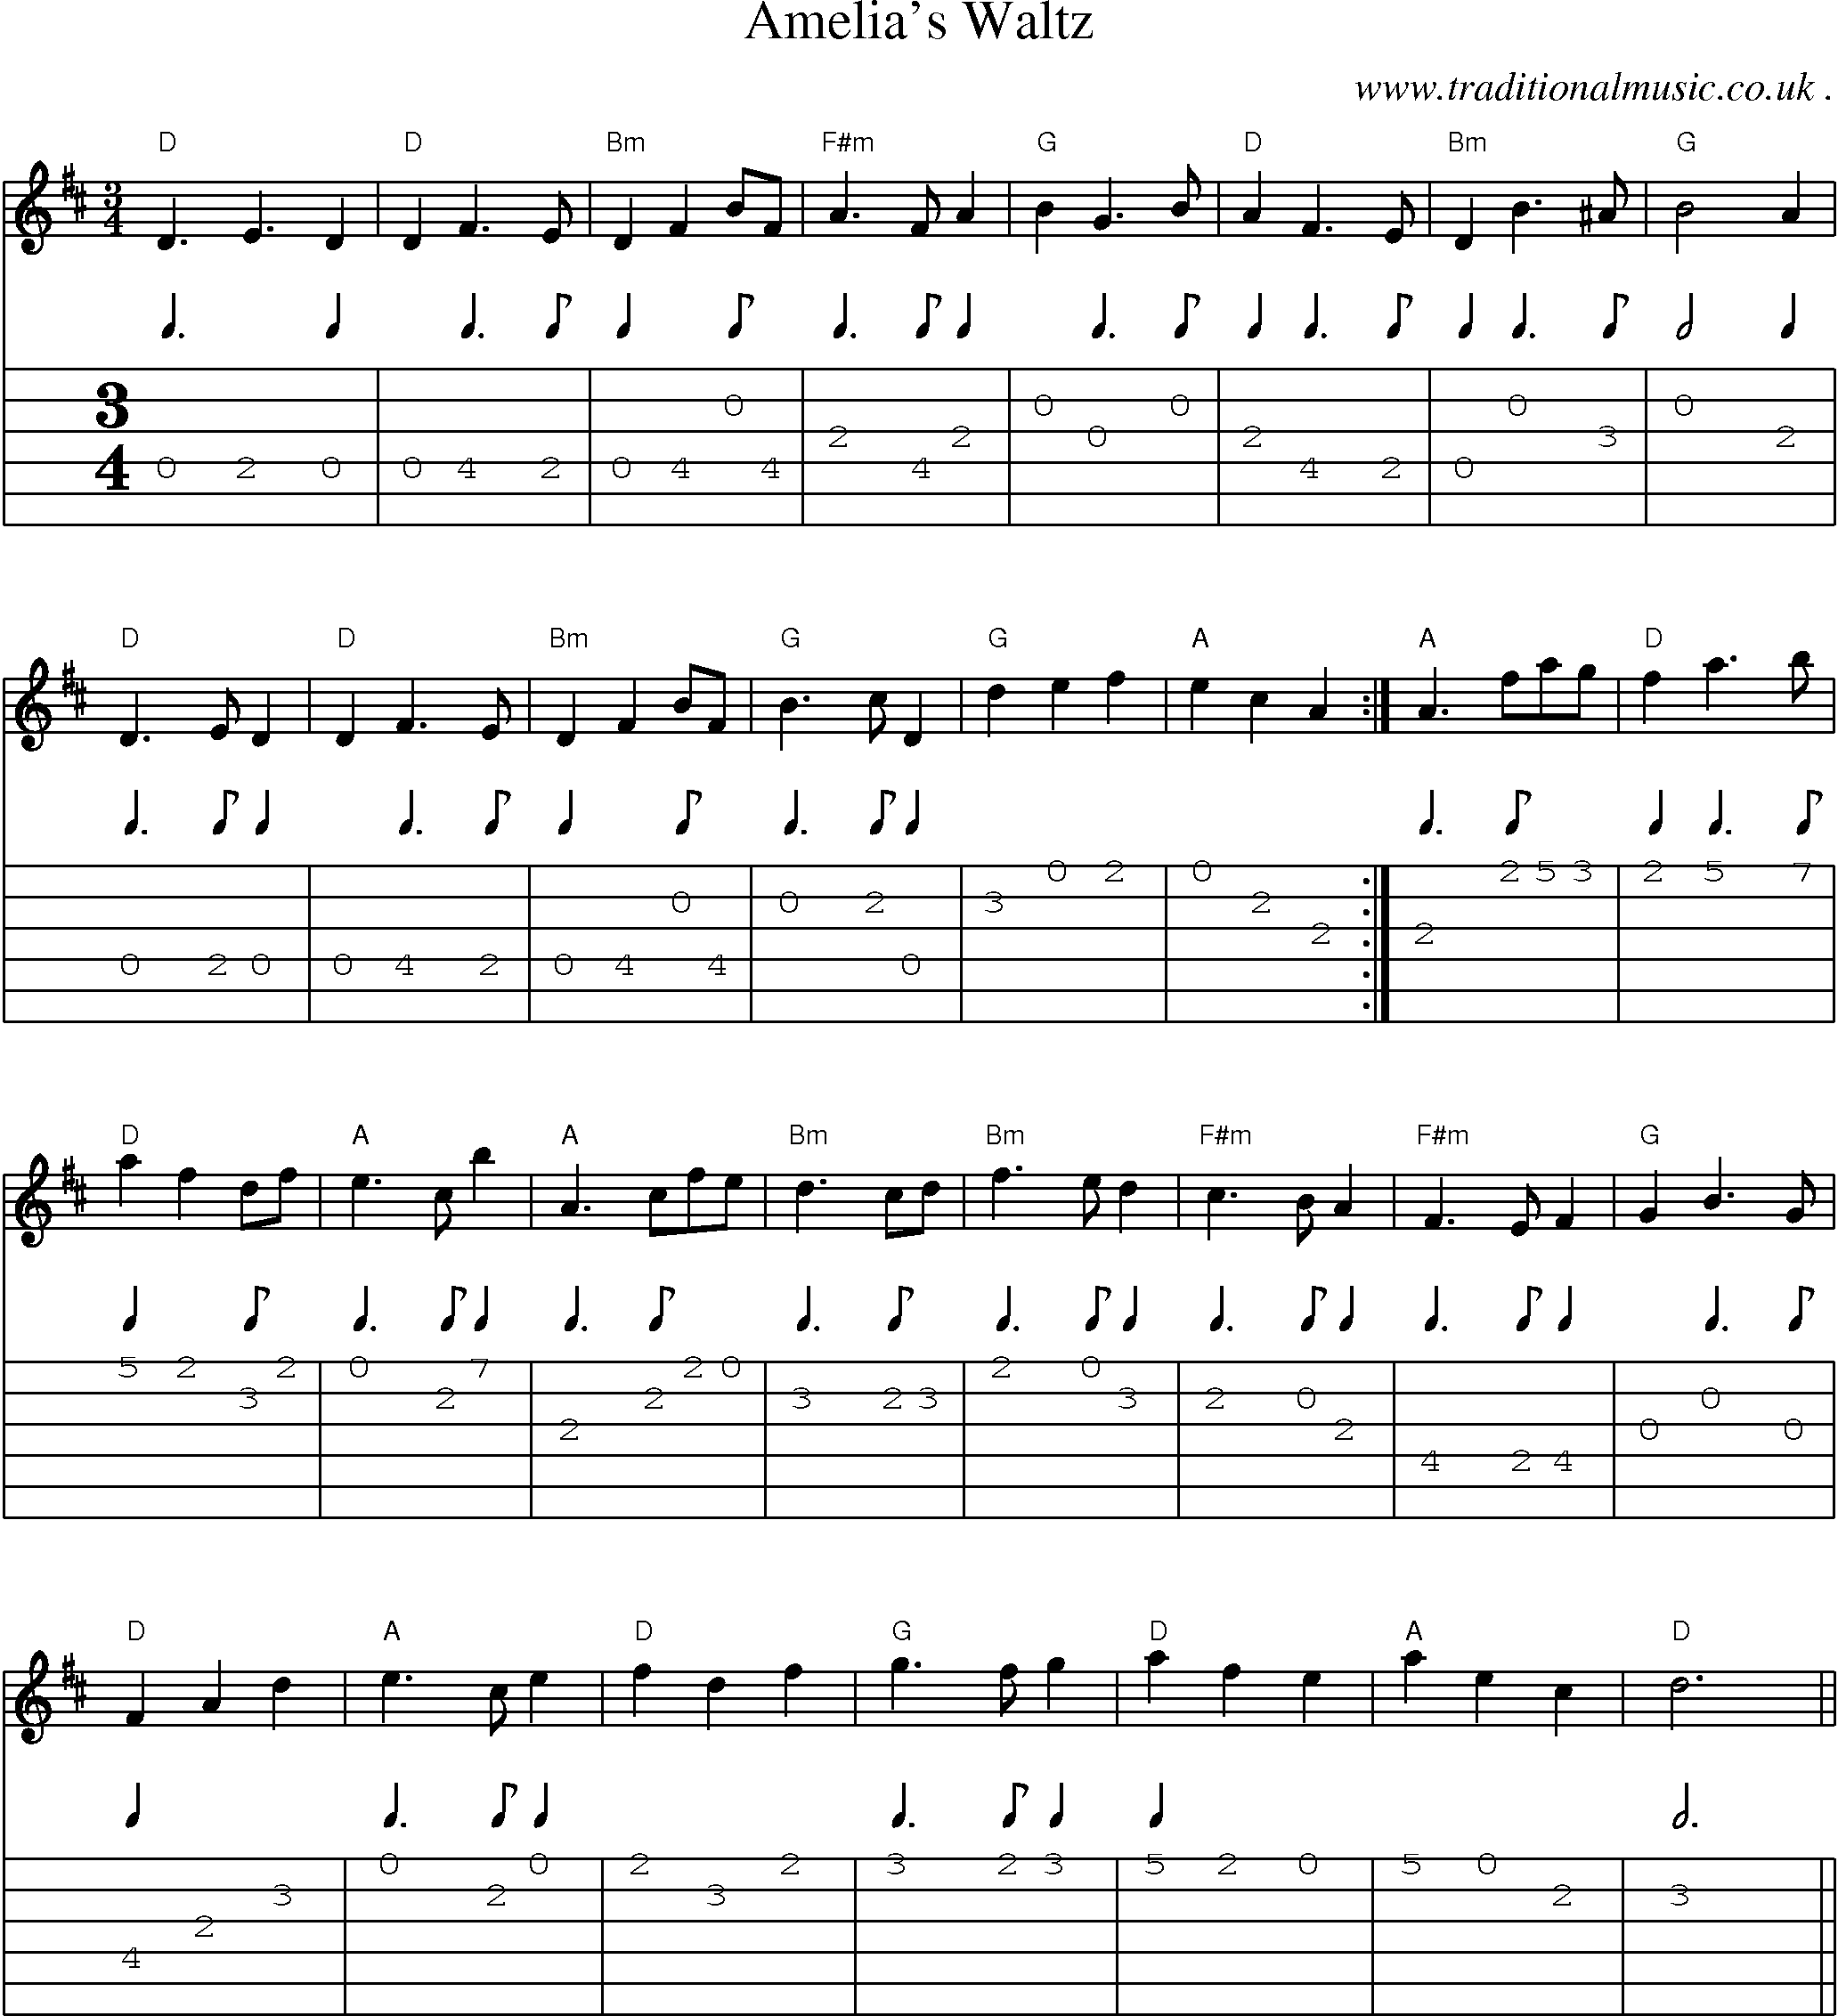 Sheet-Music and Guitar Tabs for Amelias Waltz